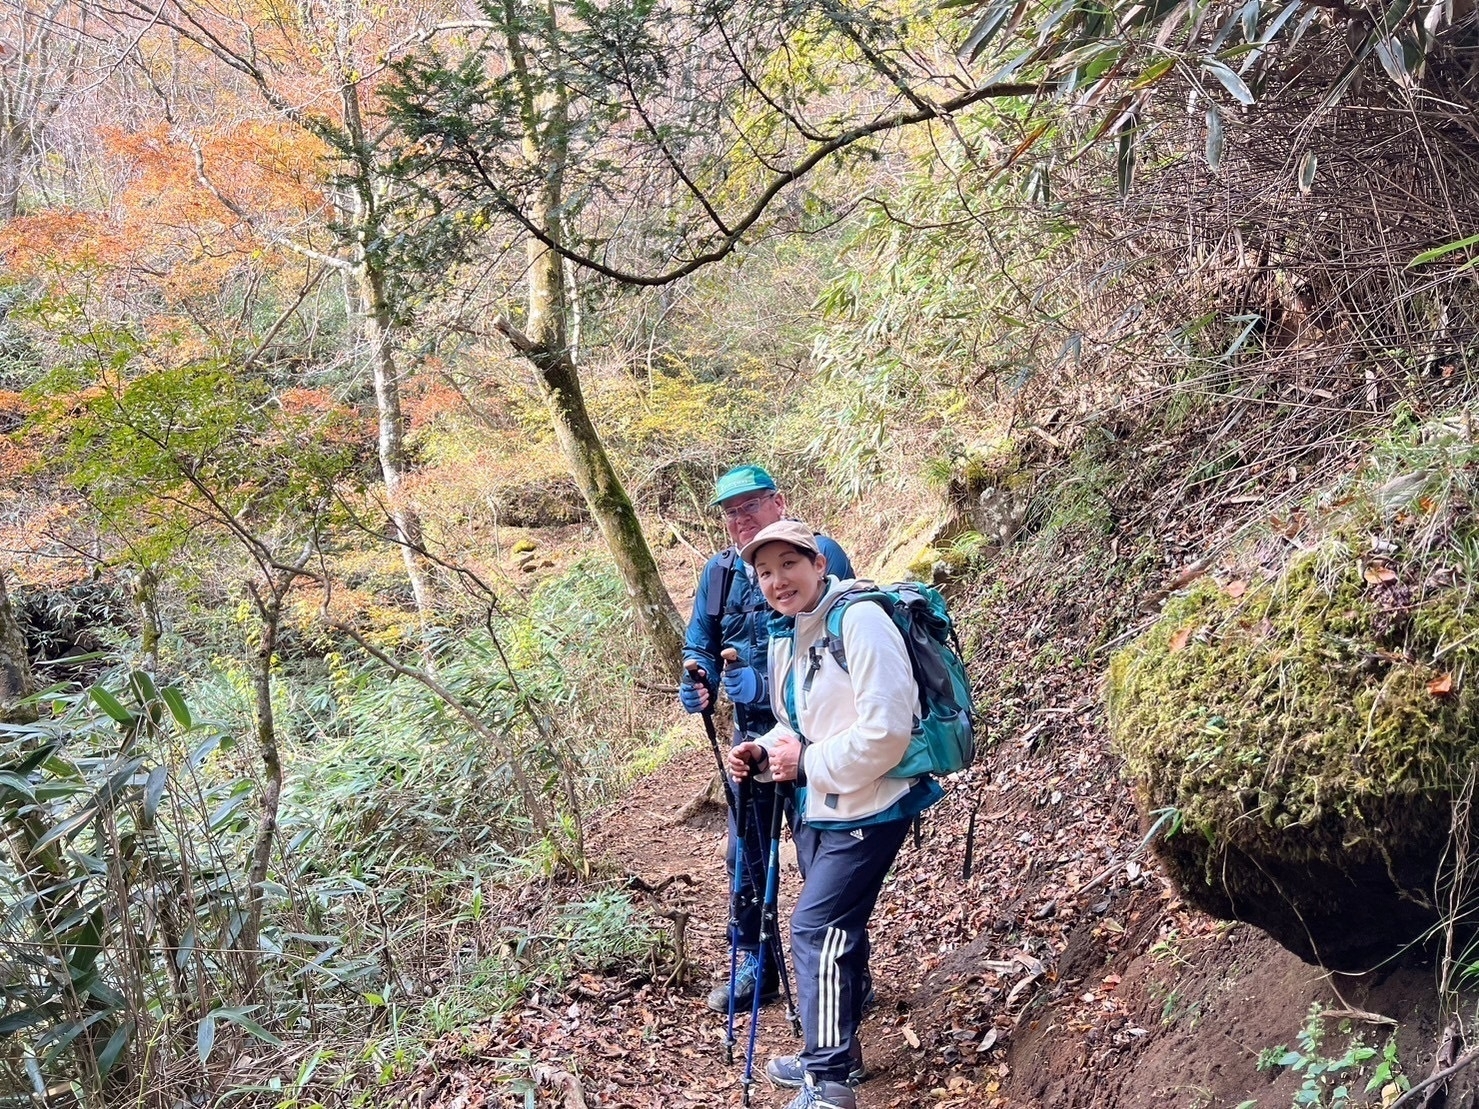 Woman in white and man in blue hold hiking poles and wear backpacks on a hiking trail. 